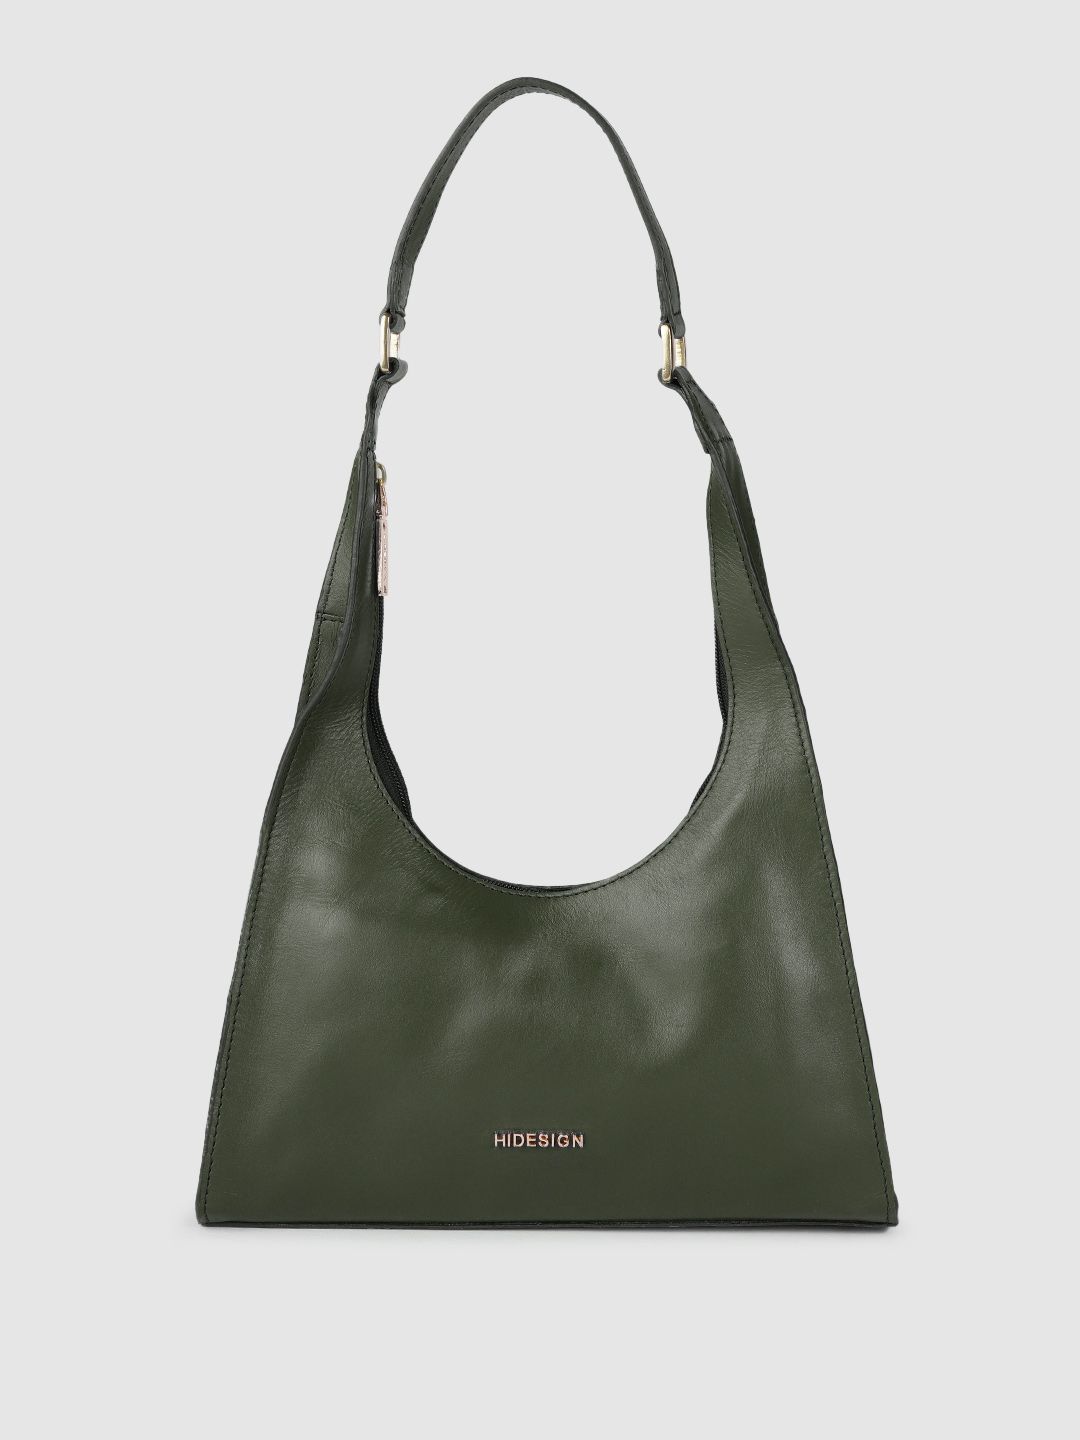 Hidesign Women Green Leather Solid Hobo Bag Price in India